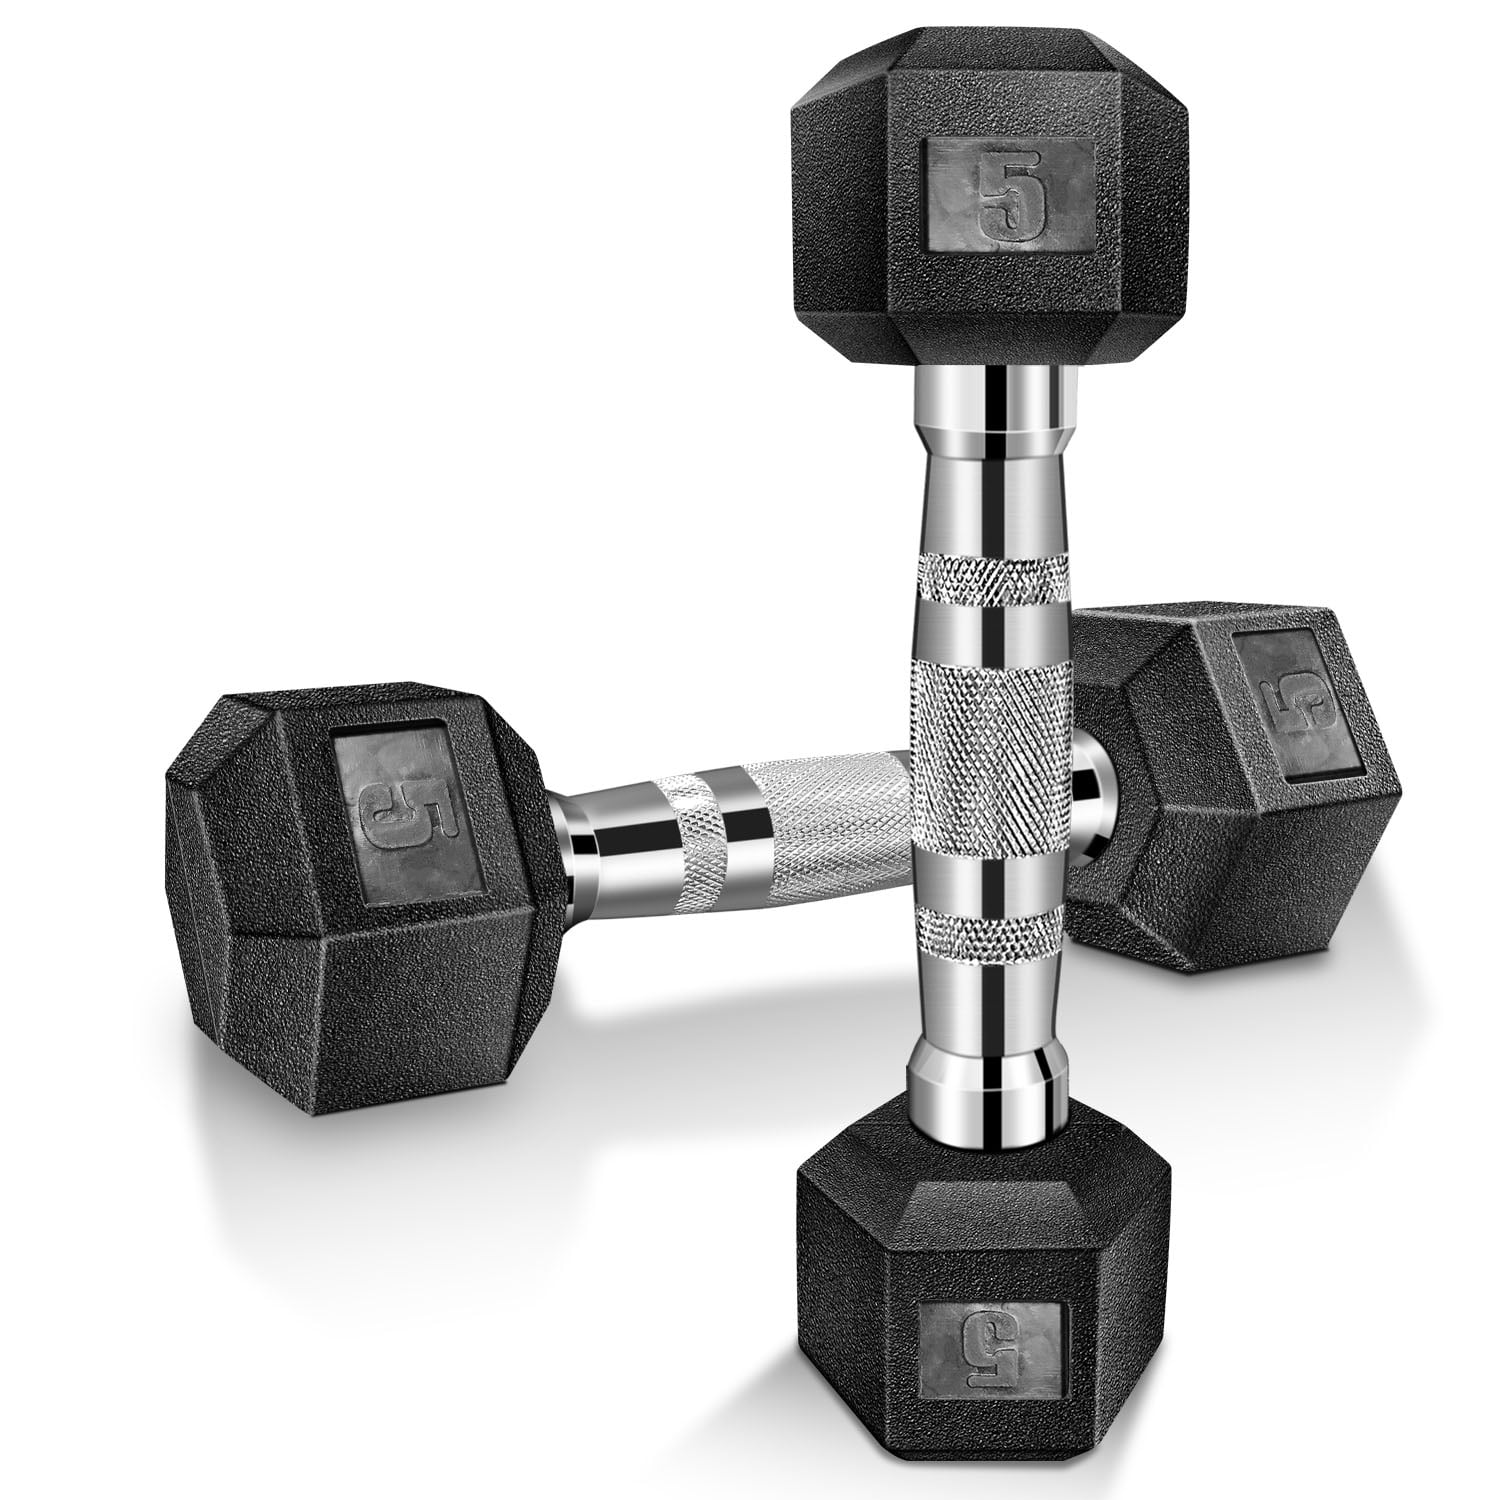 Pair of Rubber Coated Hex Dumbbell Hand Weight Set 5 lb to 50 Pound 